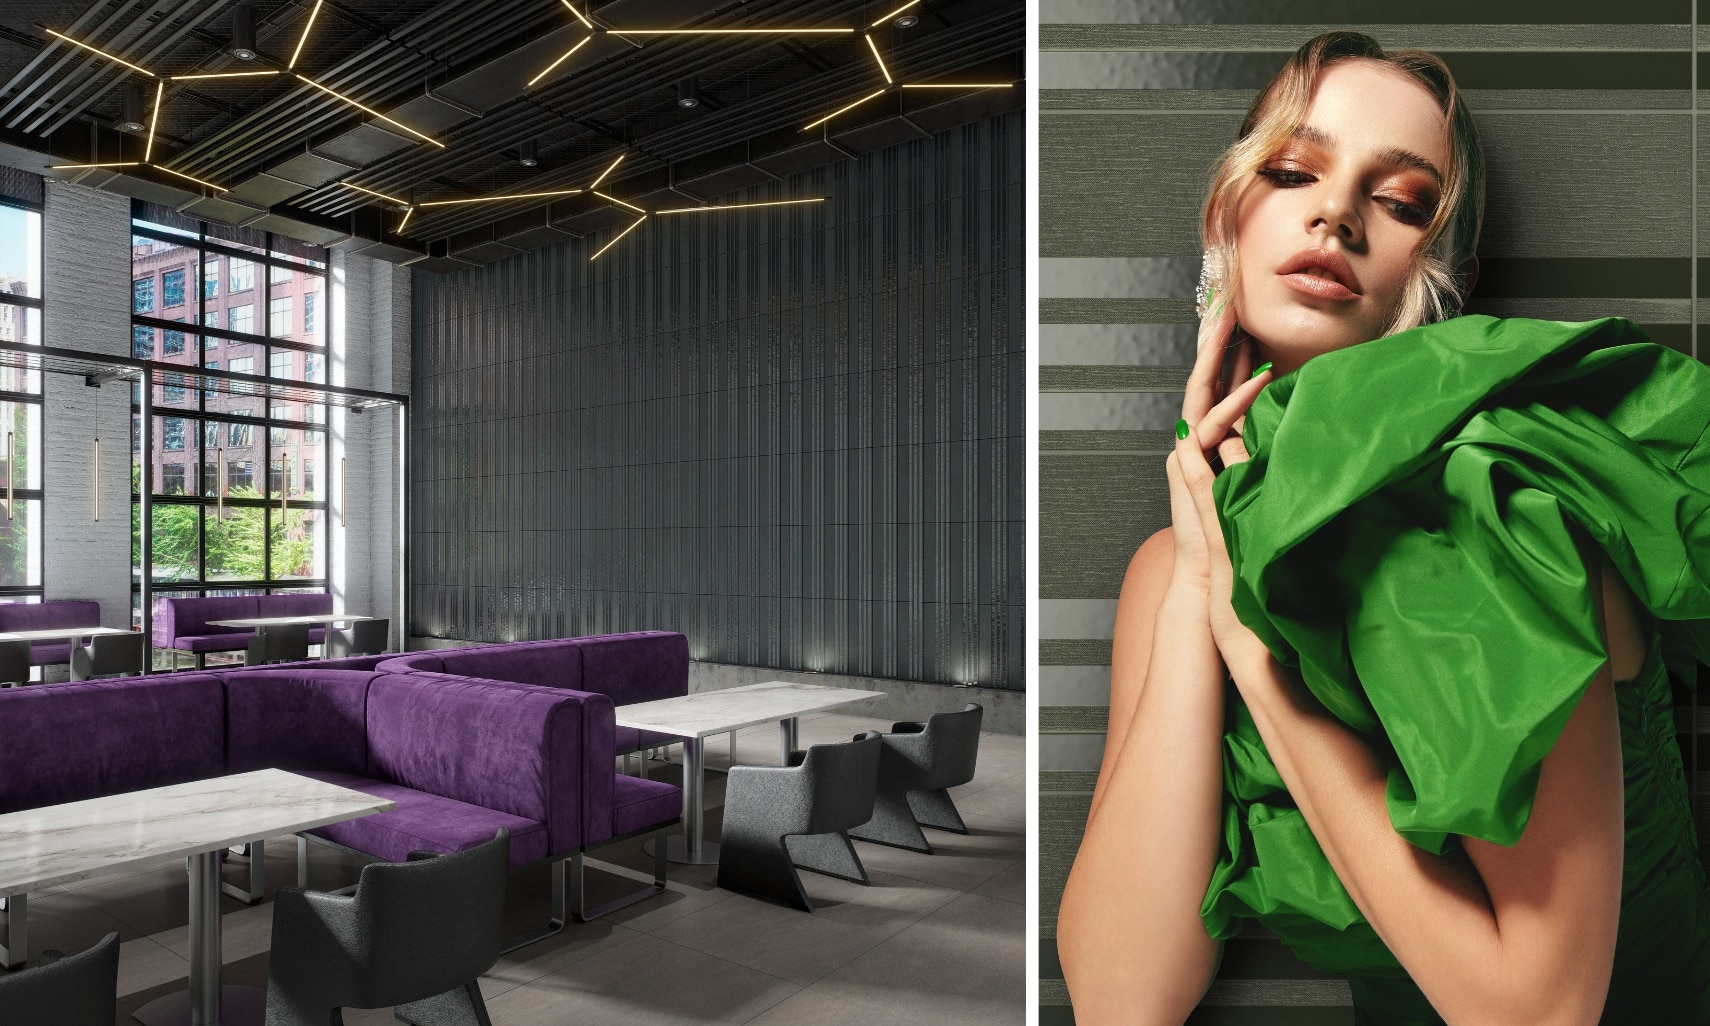 Collage of a restaurant dining room with wall of black tile with glossy and matte stripes and woman standing in front of a wall of green glossy and matte stripes.